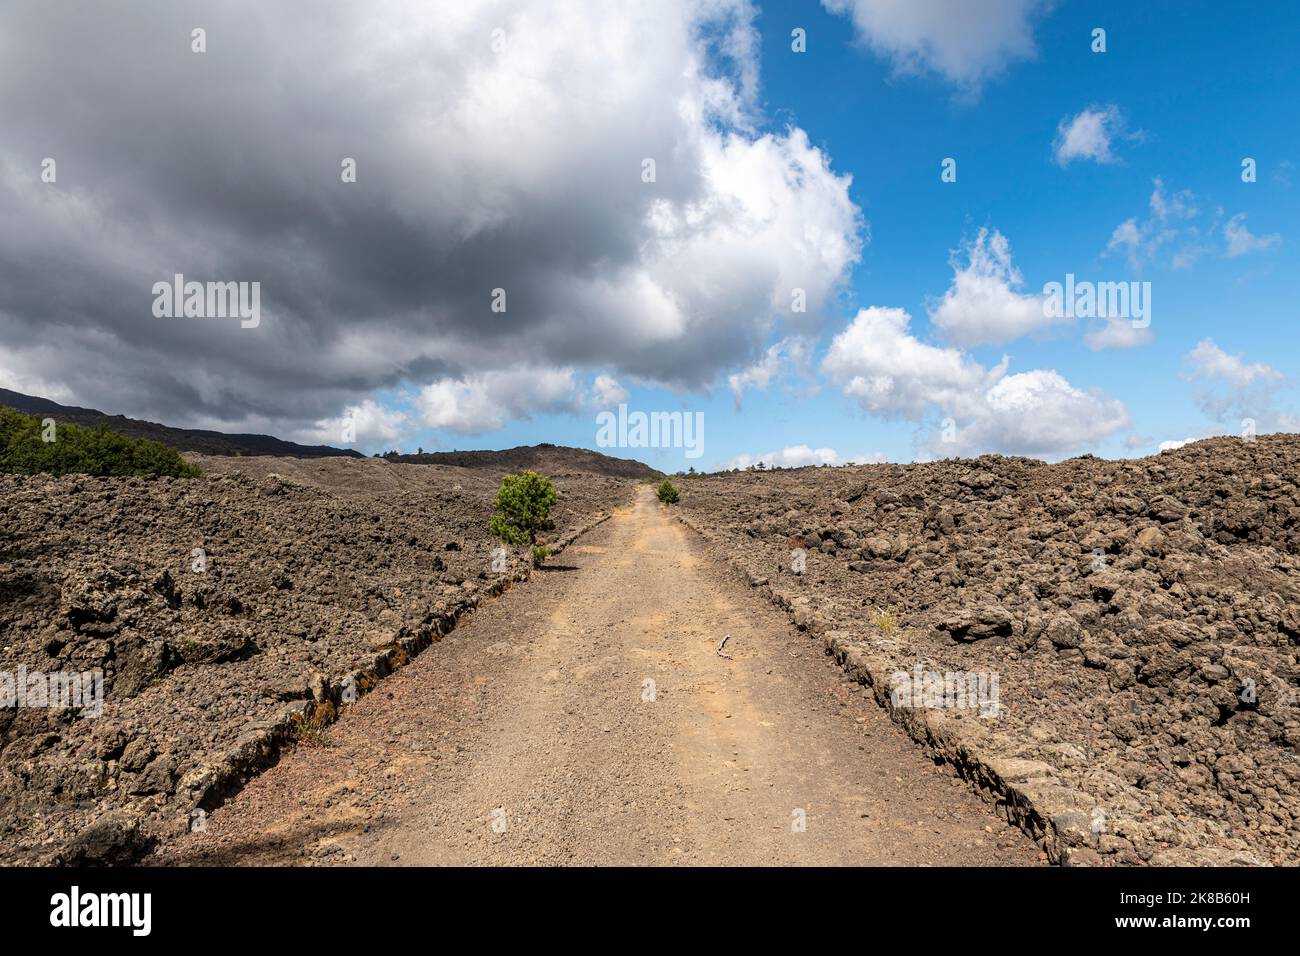 A long-distance hiking trail and forestry track crosses the harsh terrain of an old lava flow high on the slopes of Mount Etna, Sicily Stock Photo